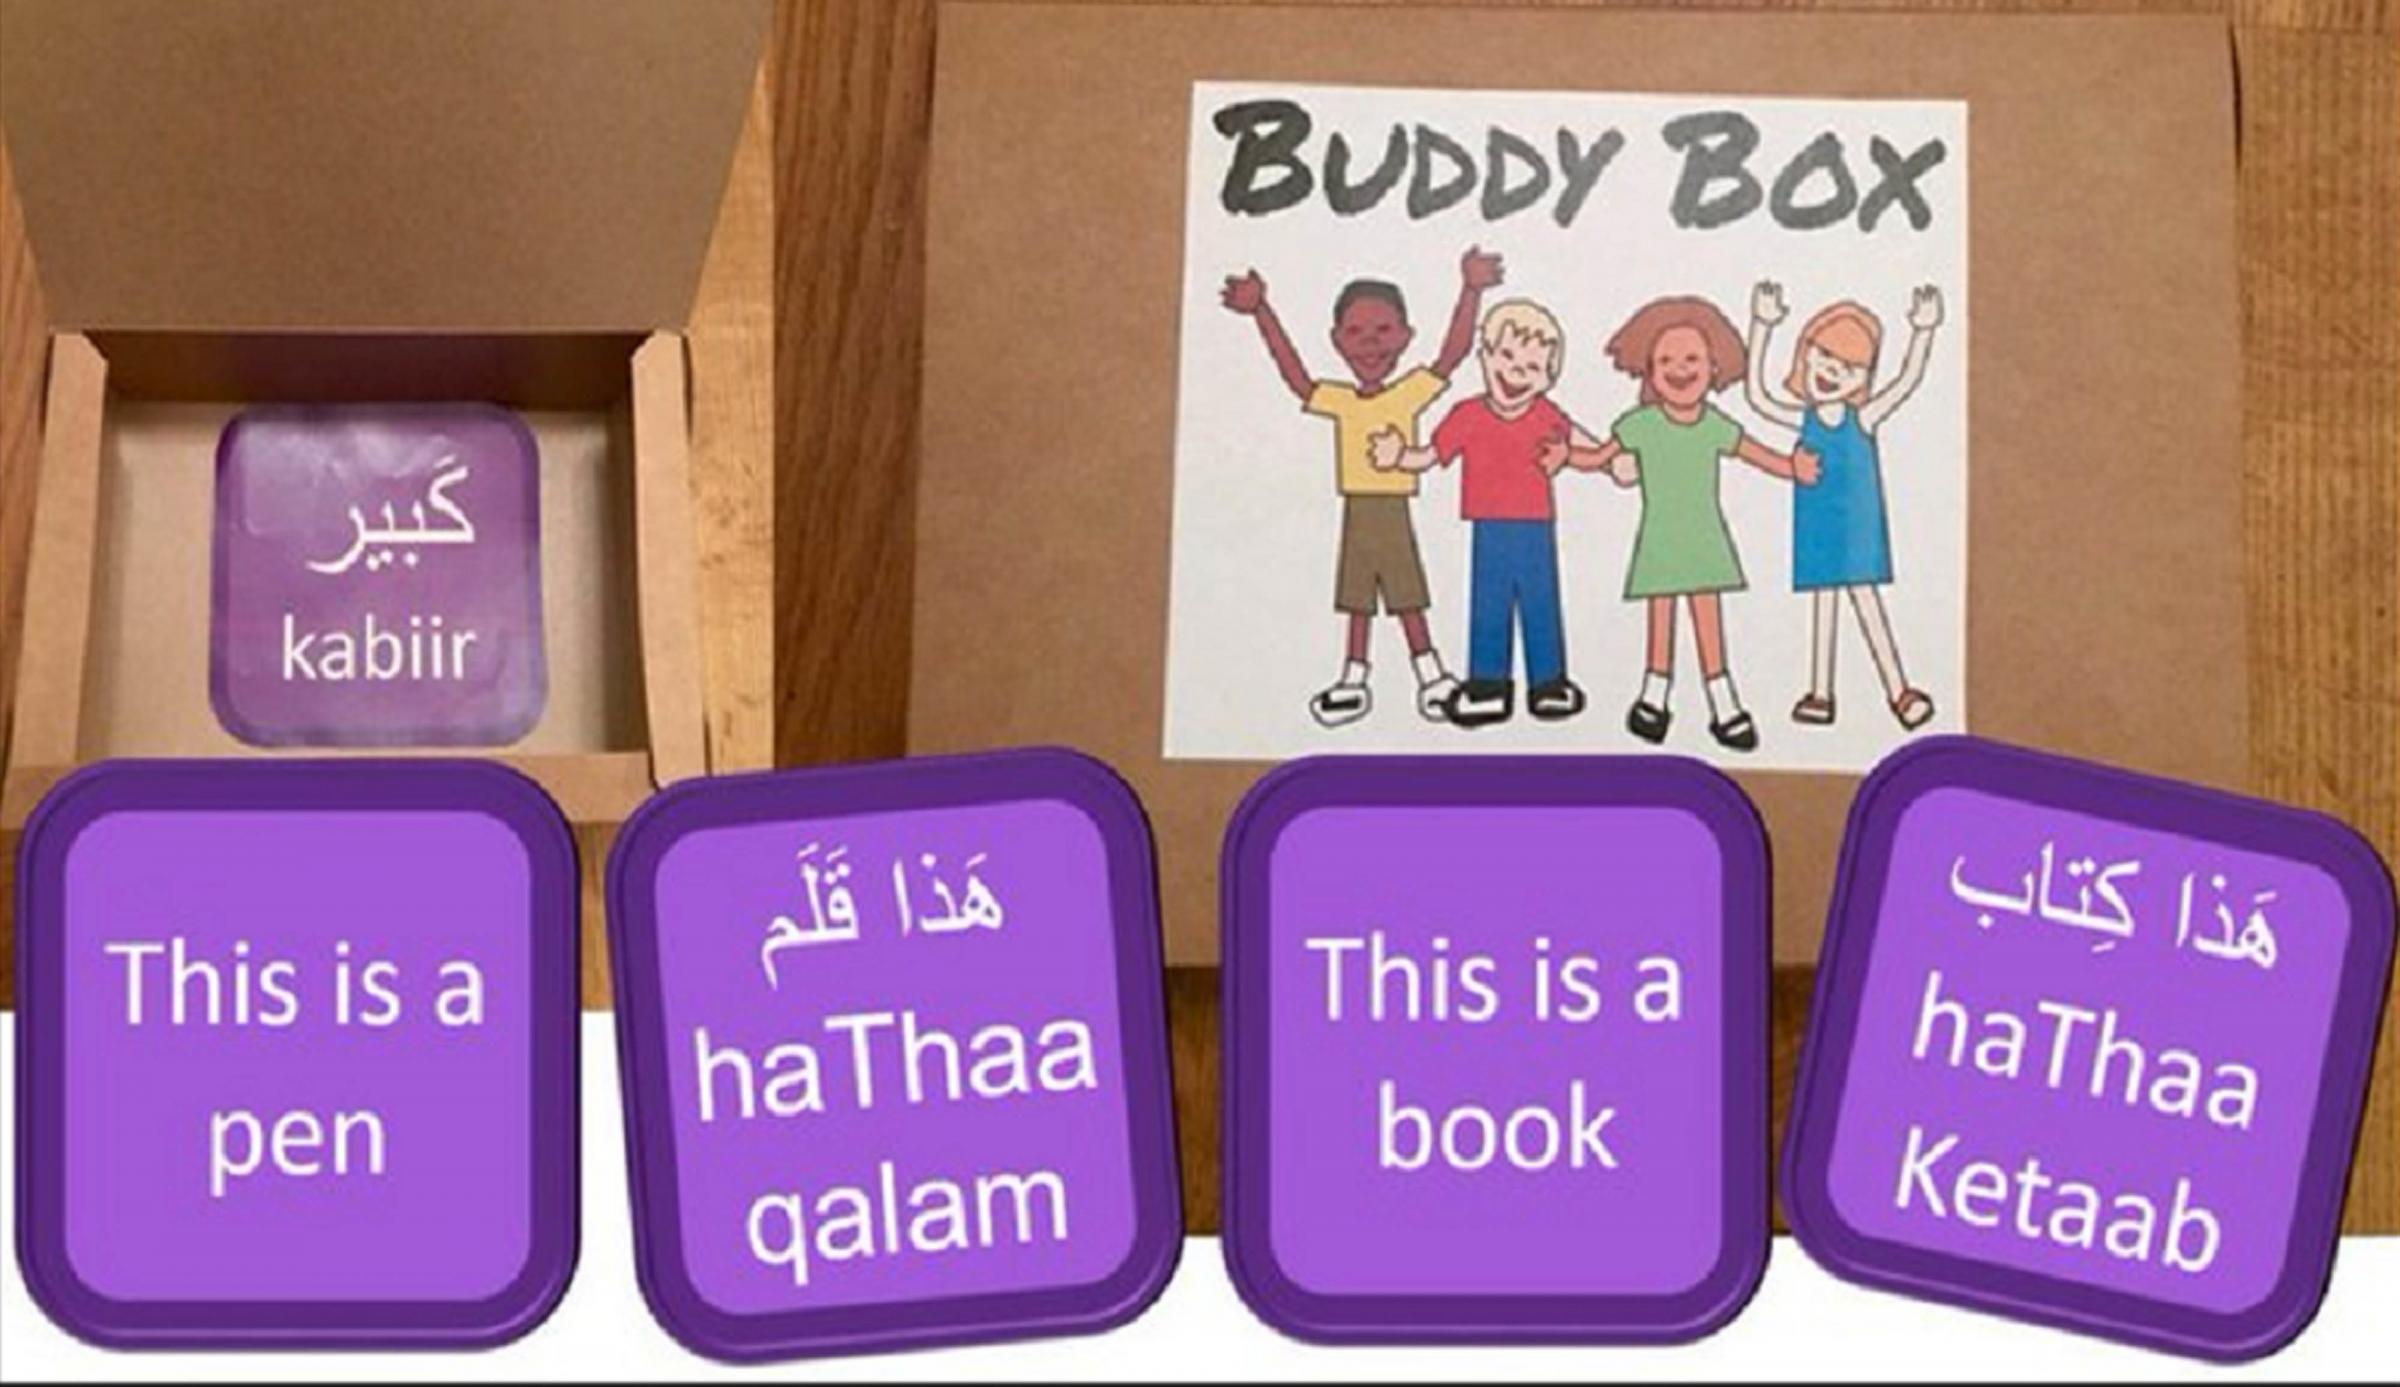 A buddy box created by Mark Hill, an armed forces veteran and entrepreneur, who has made them to help Afghan refugees learn English in schools